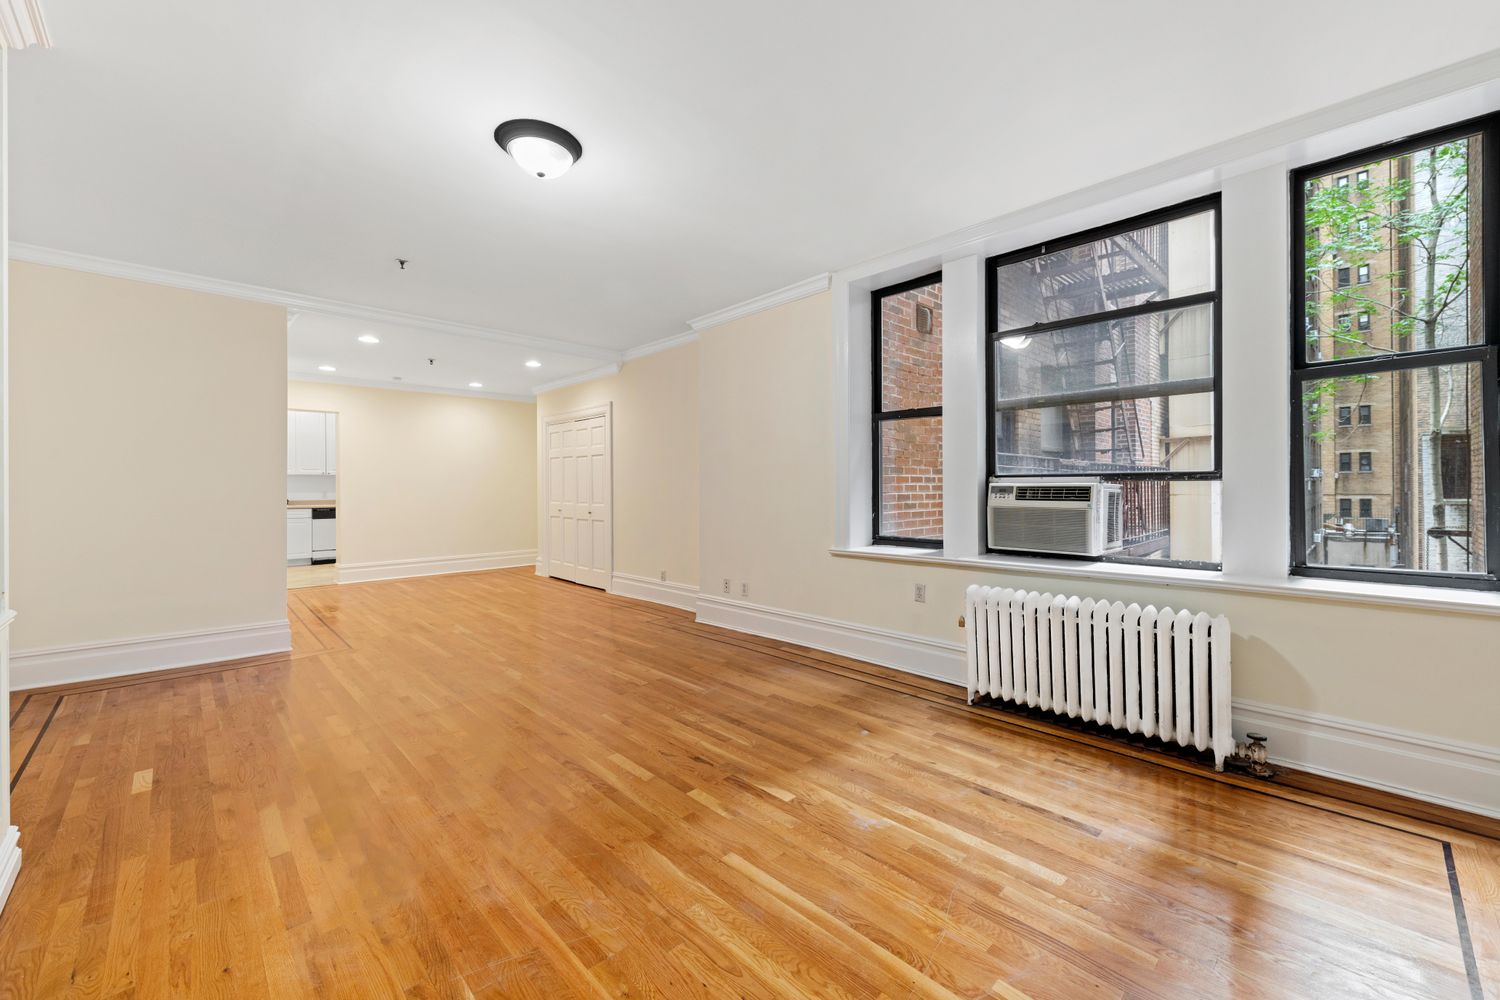 Apartments & Houses for Rent in Upper West Side, Manhattan | Compass